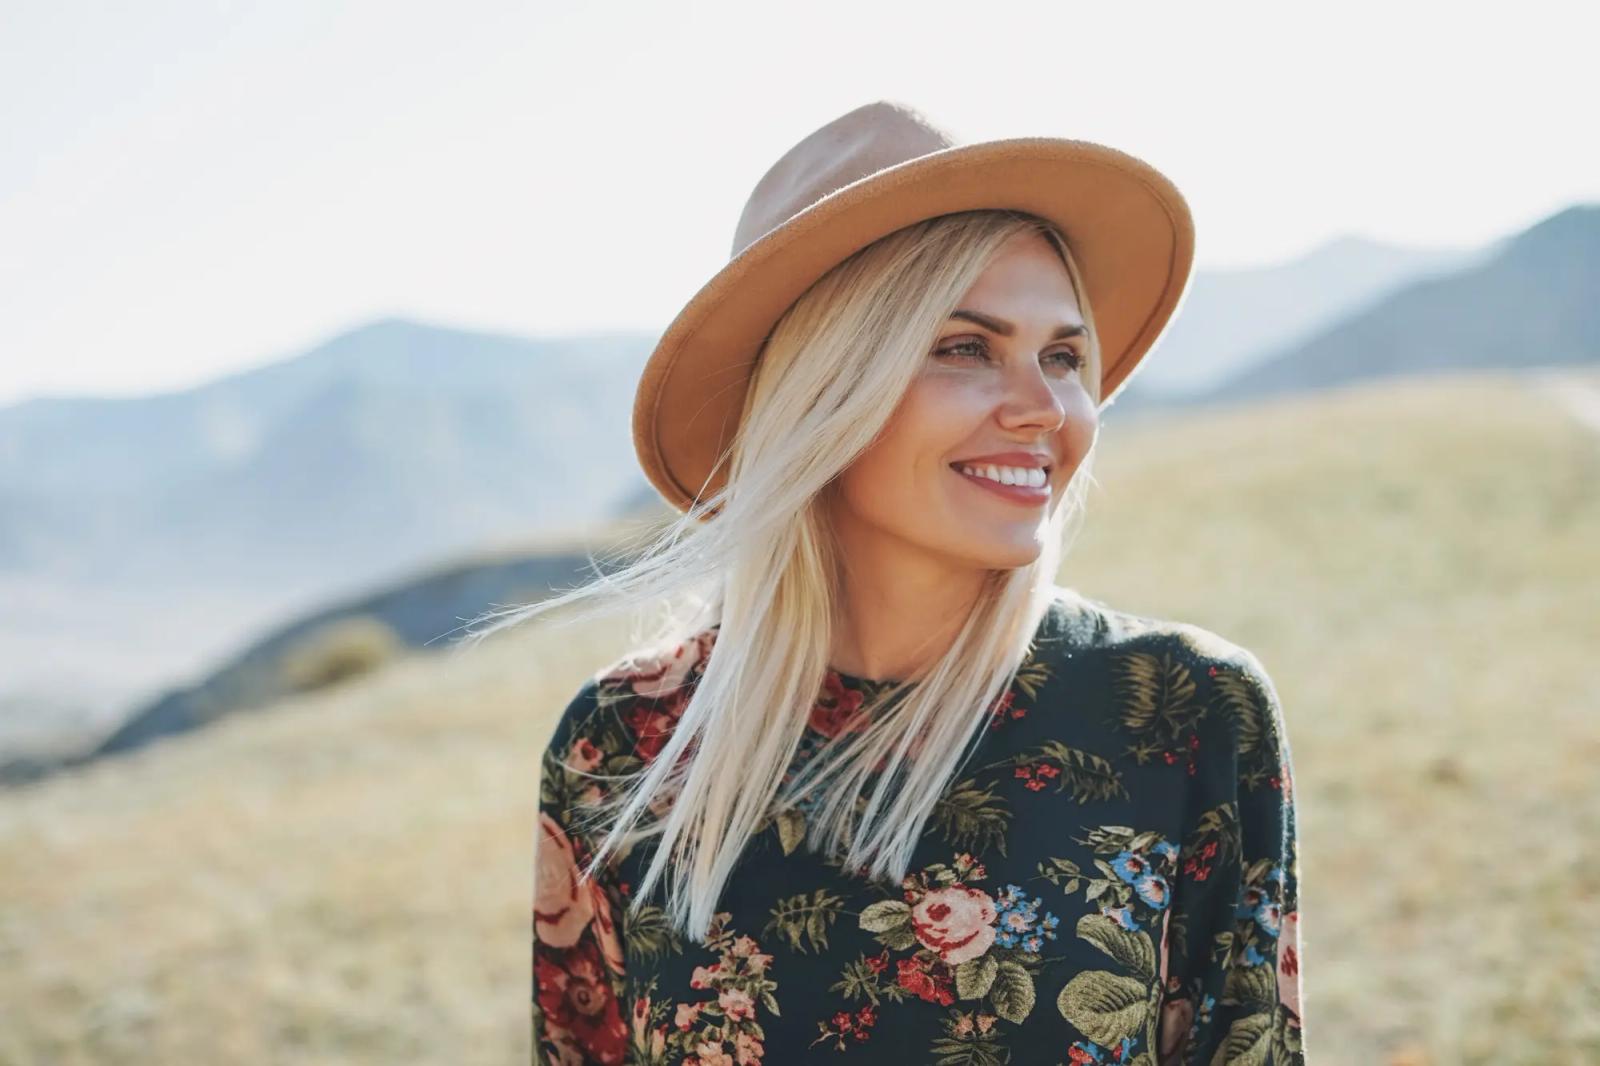 Woman with blonde hair in a beige hot standing in a field in the mountains smiling and looking out to the views.